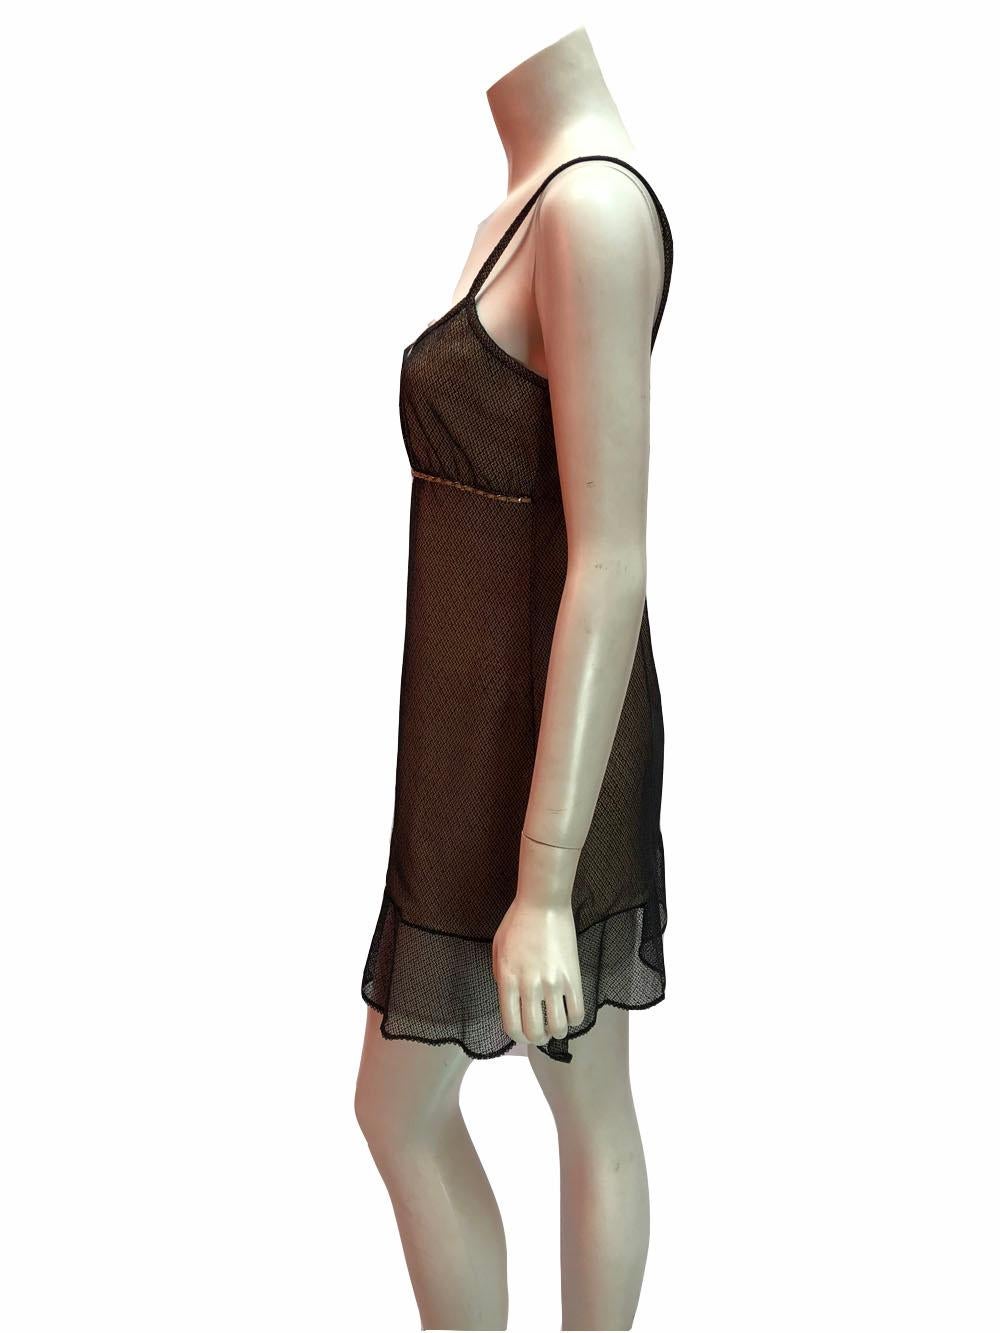 Chanel, vintage,  babydoll style slip dress in nude with black mesh overlay and chain accent under the bust. Spaghetti straps and ruffle bottom. Absolutely adorable. Very hard to find and can be worn at many sizes. 
Excellent condition. 
Size 8/10 